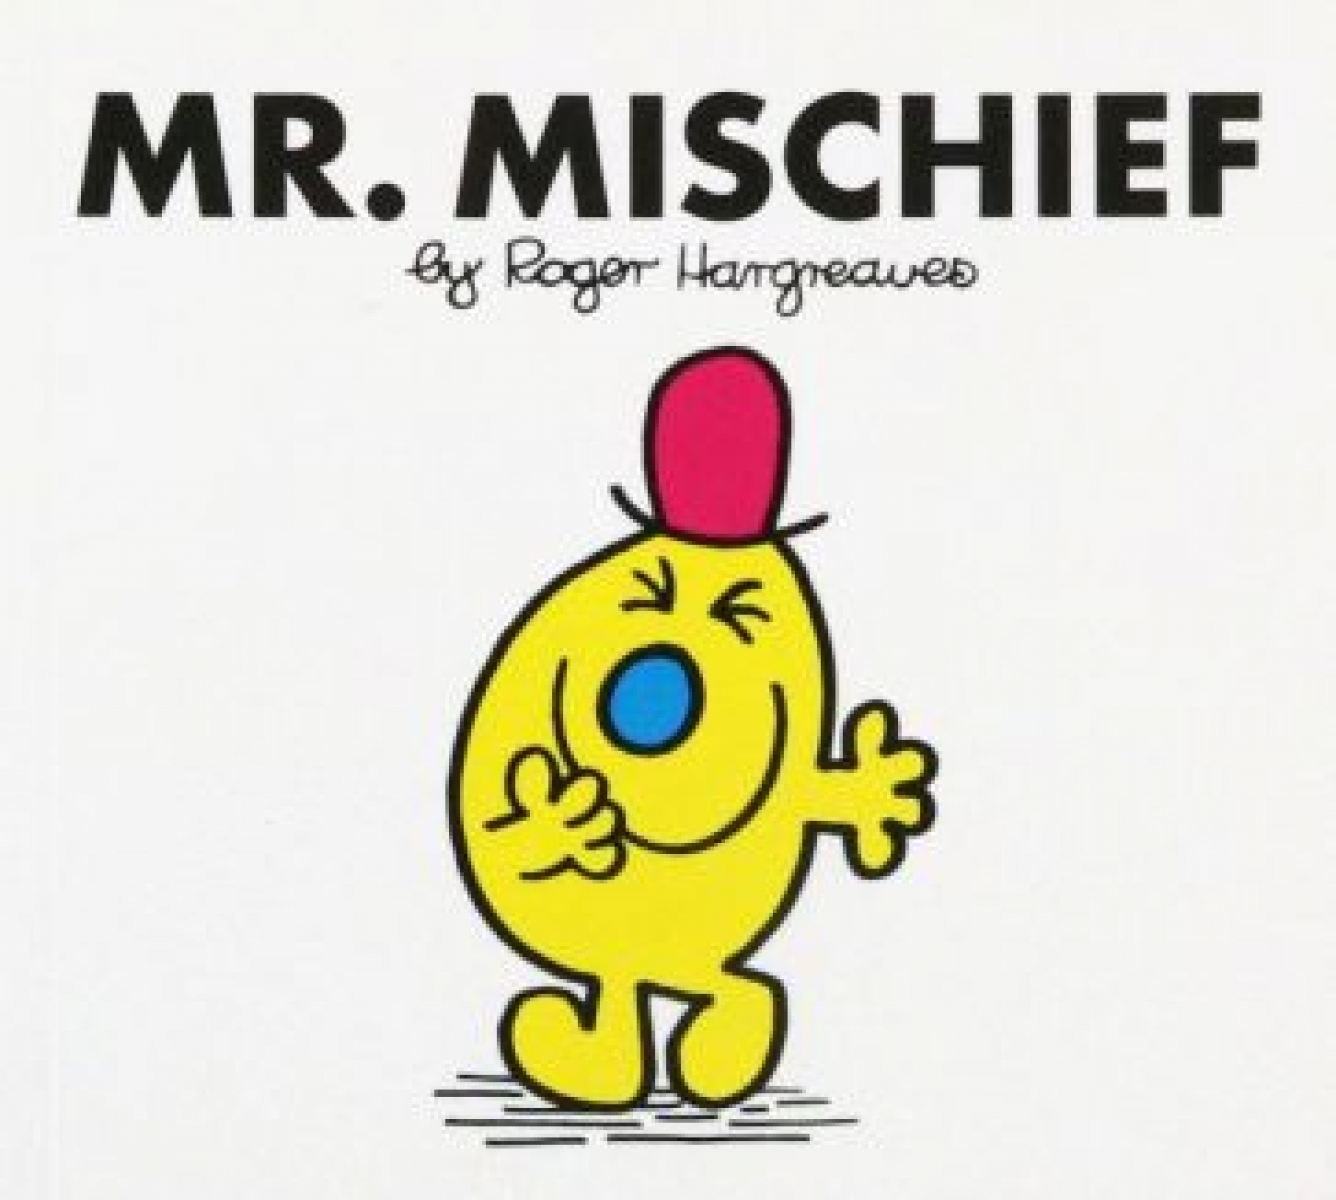 Hargreaves Roger Mr. Mischief 